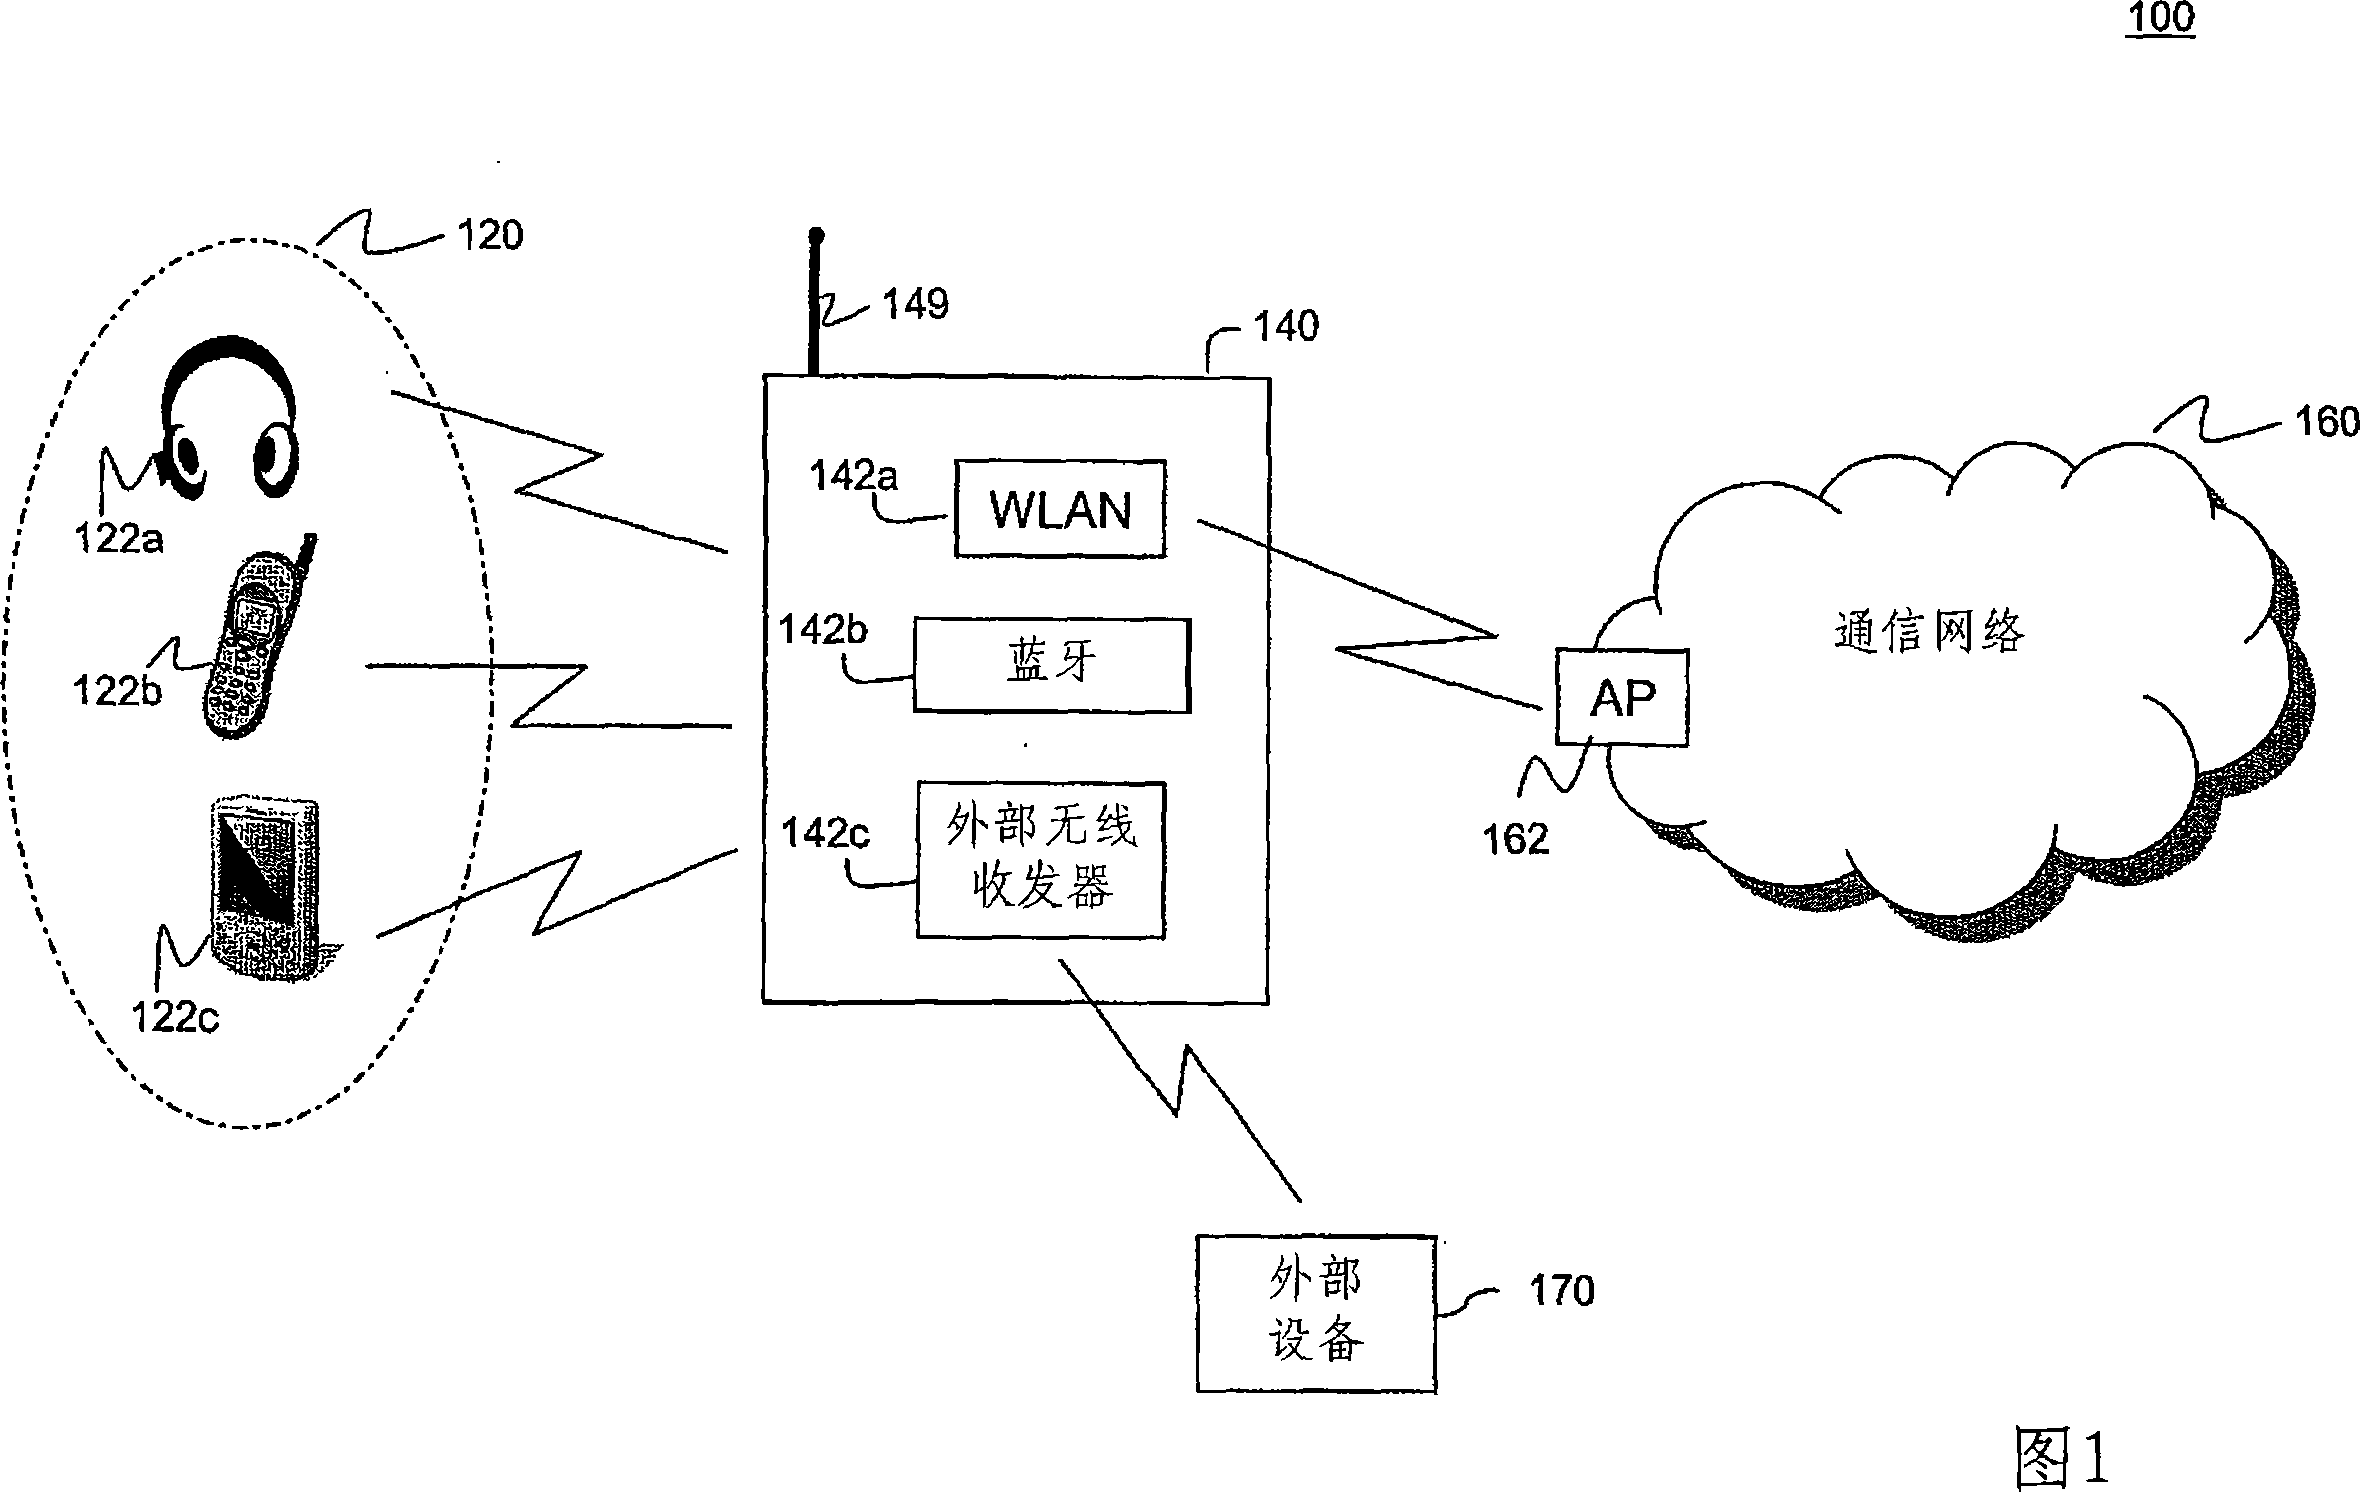 Systems and methods for enabling coexistence of multiple wireless components operating in the same frequency band